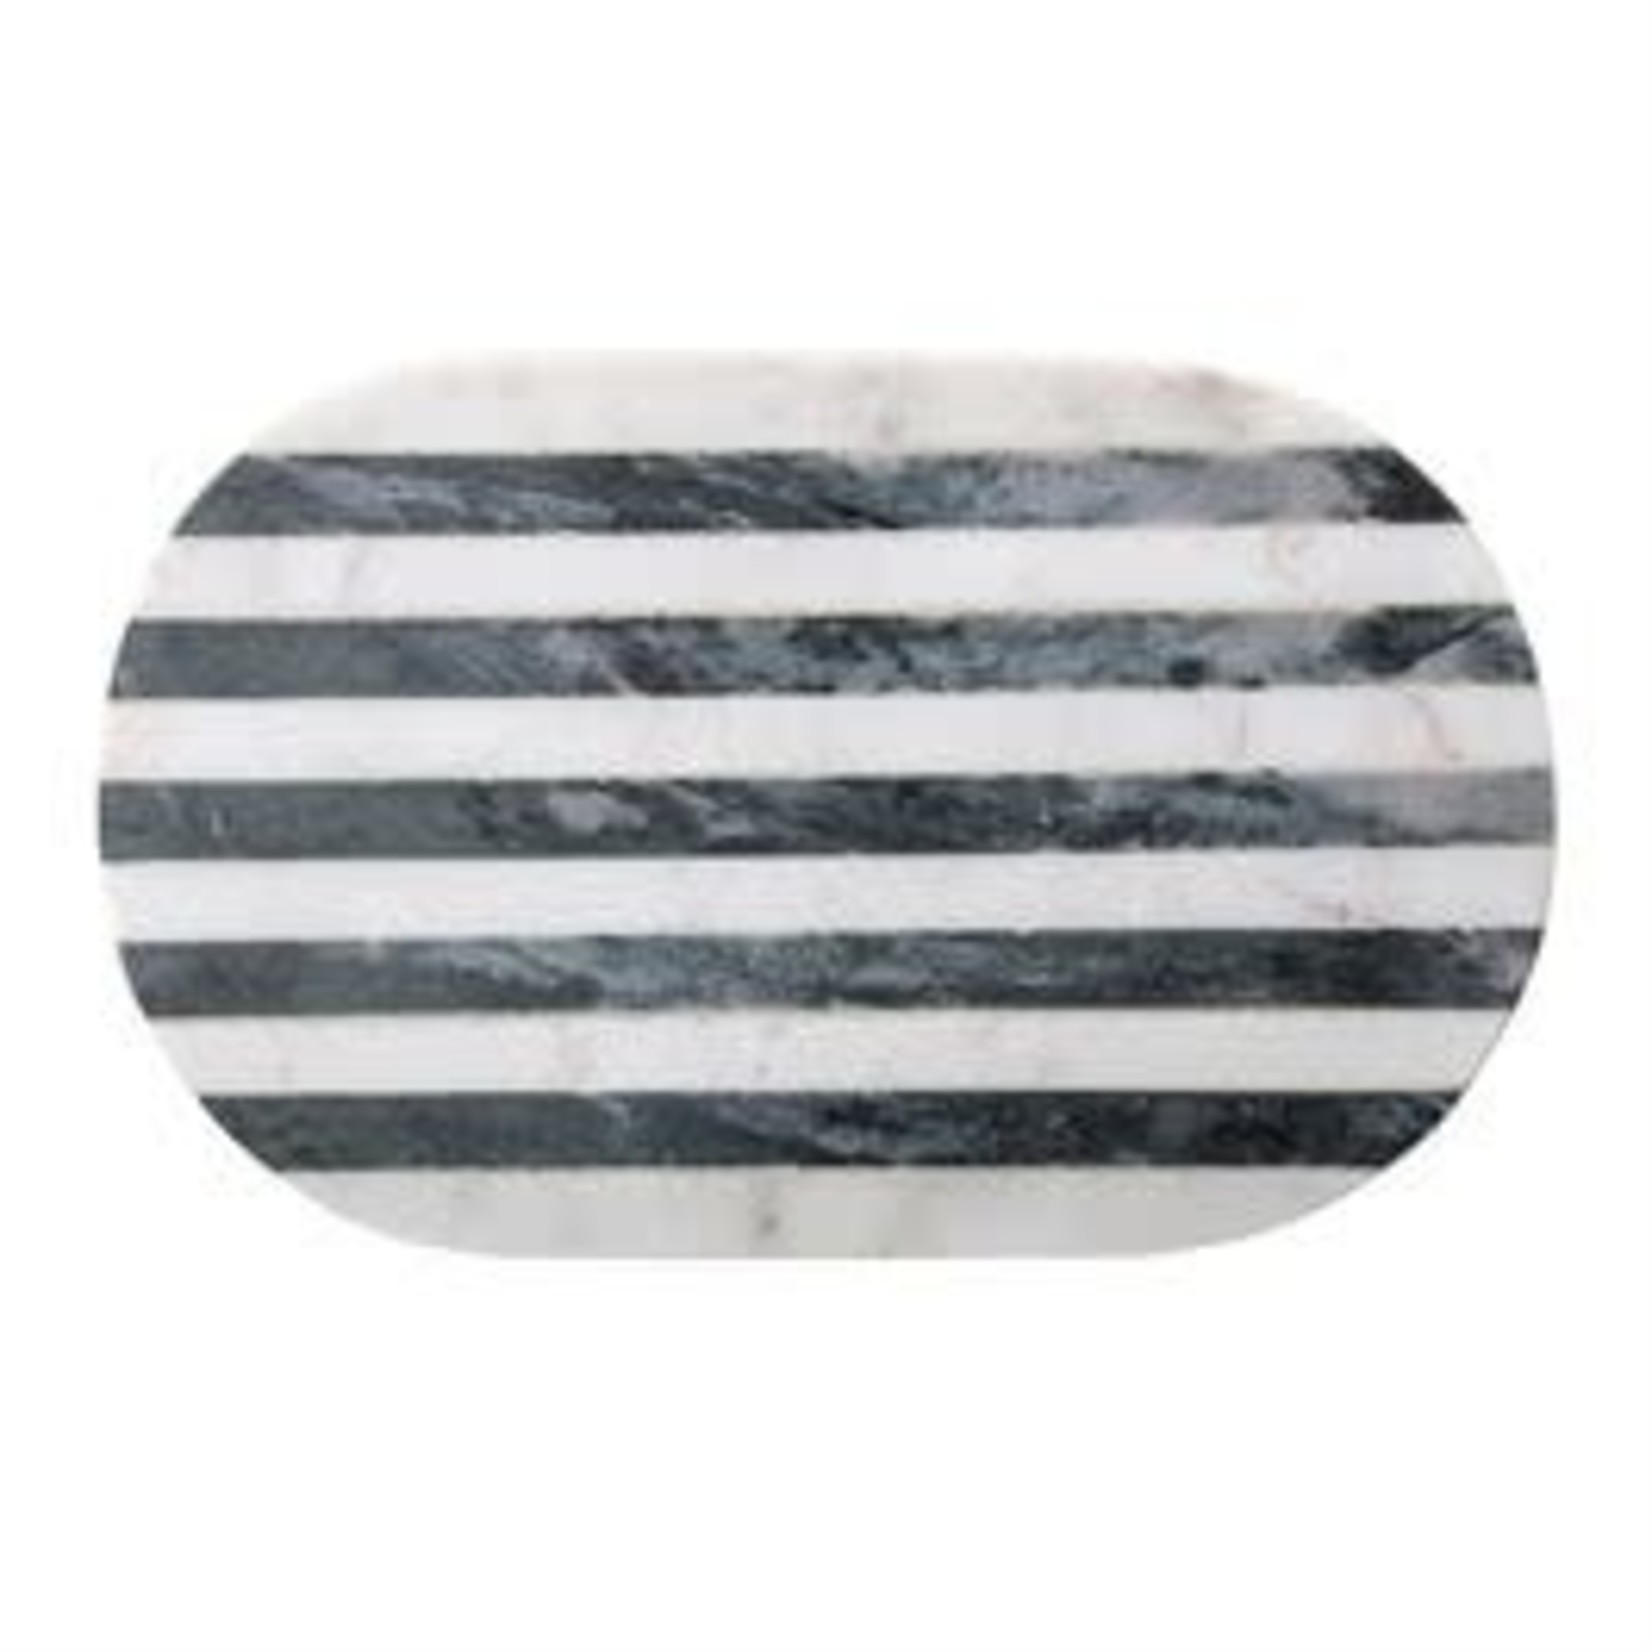 BLOOMINGVILLE MARBLE CHEESE CUTTING BOARD